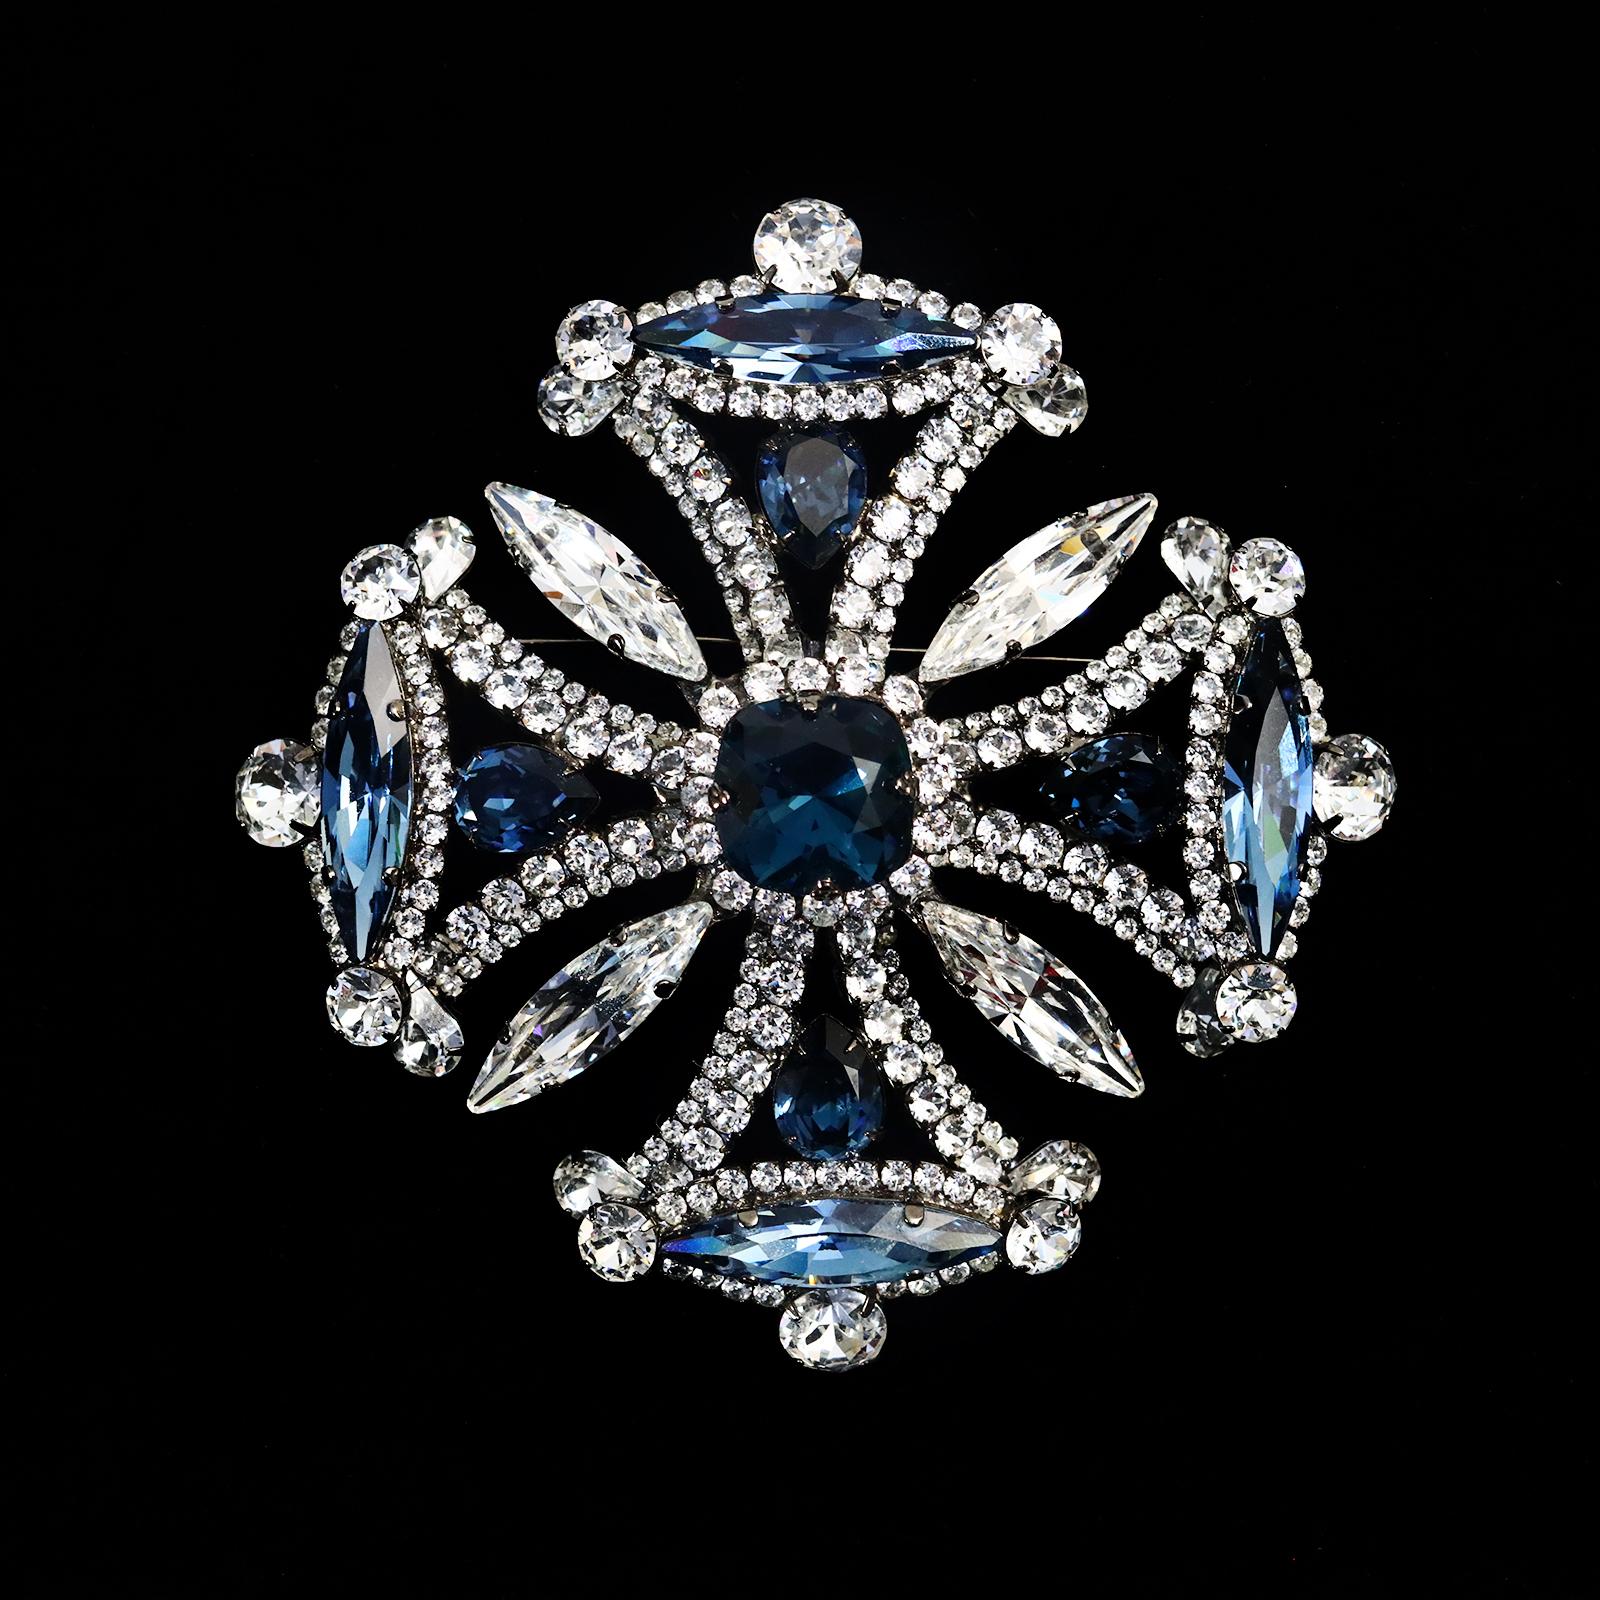 Collectible Tim Szlyk Saphire Blue Clear Crystal Brooch and Pendant Circa 2000s For Sale 1